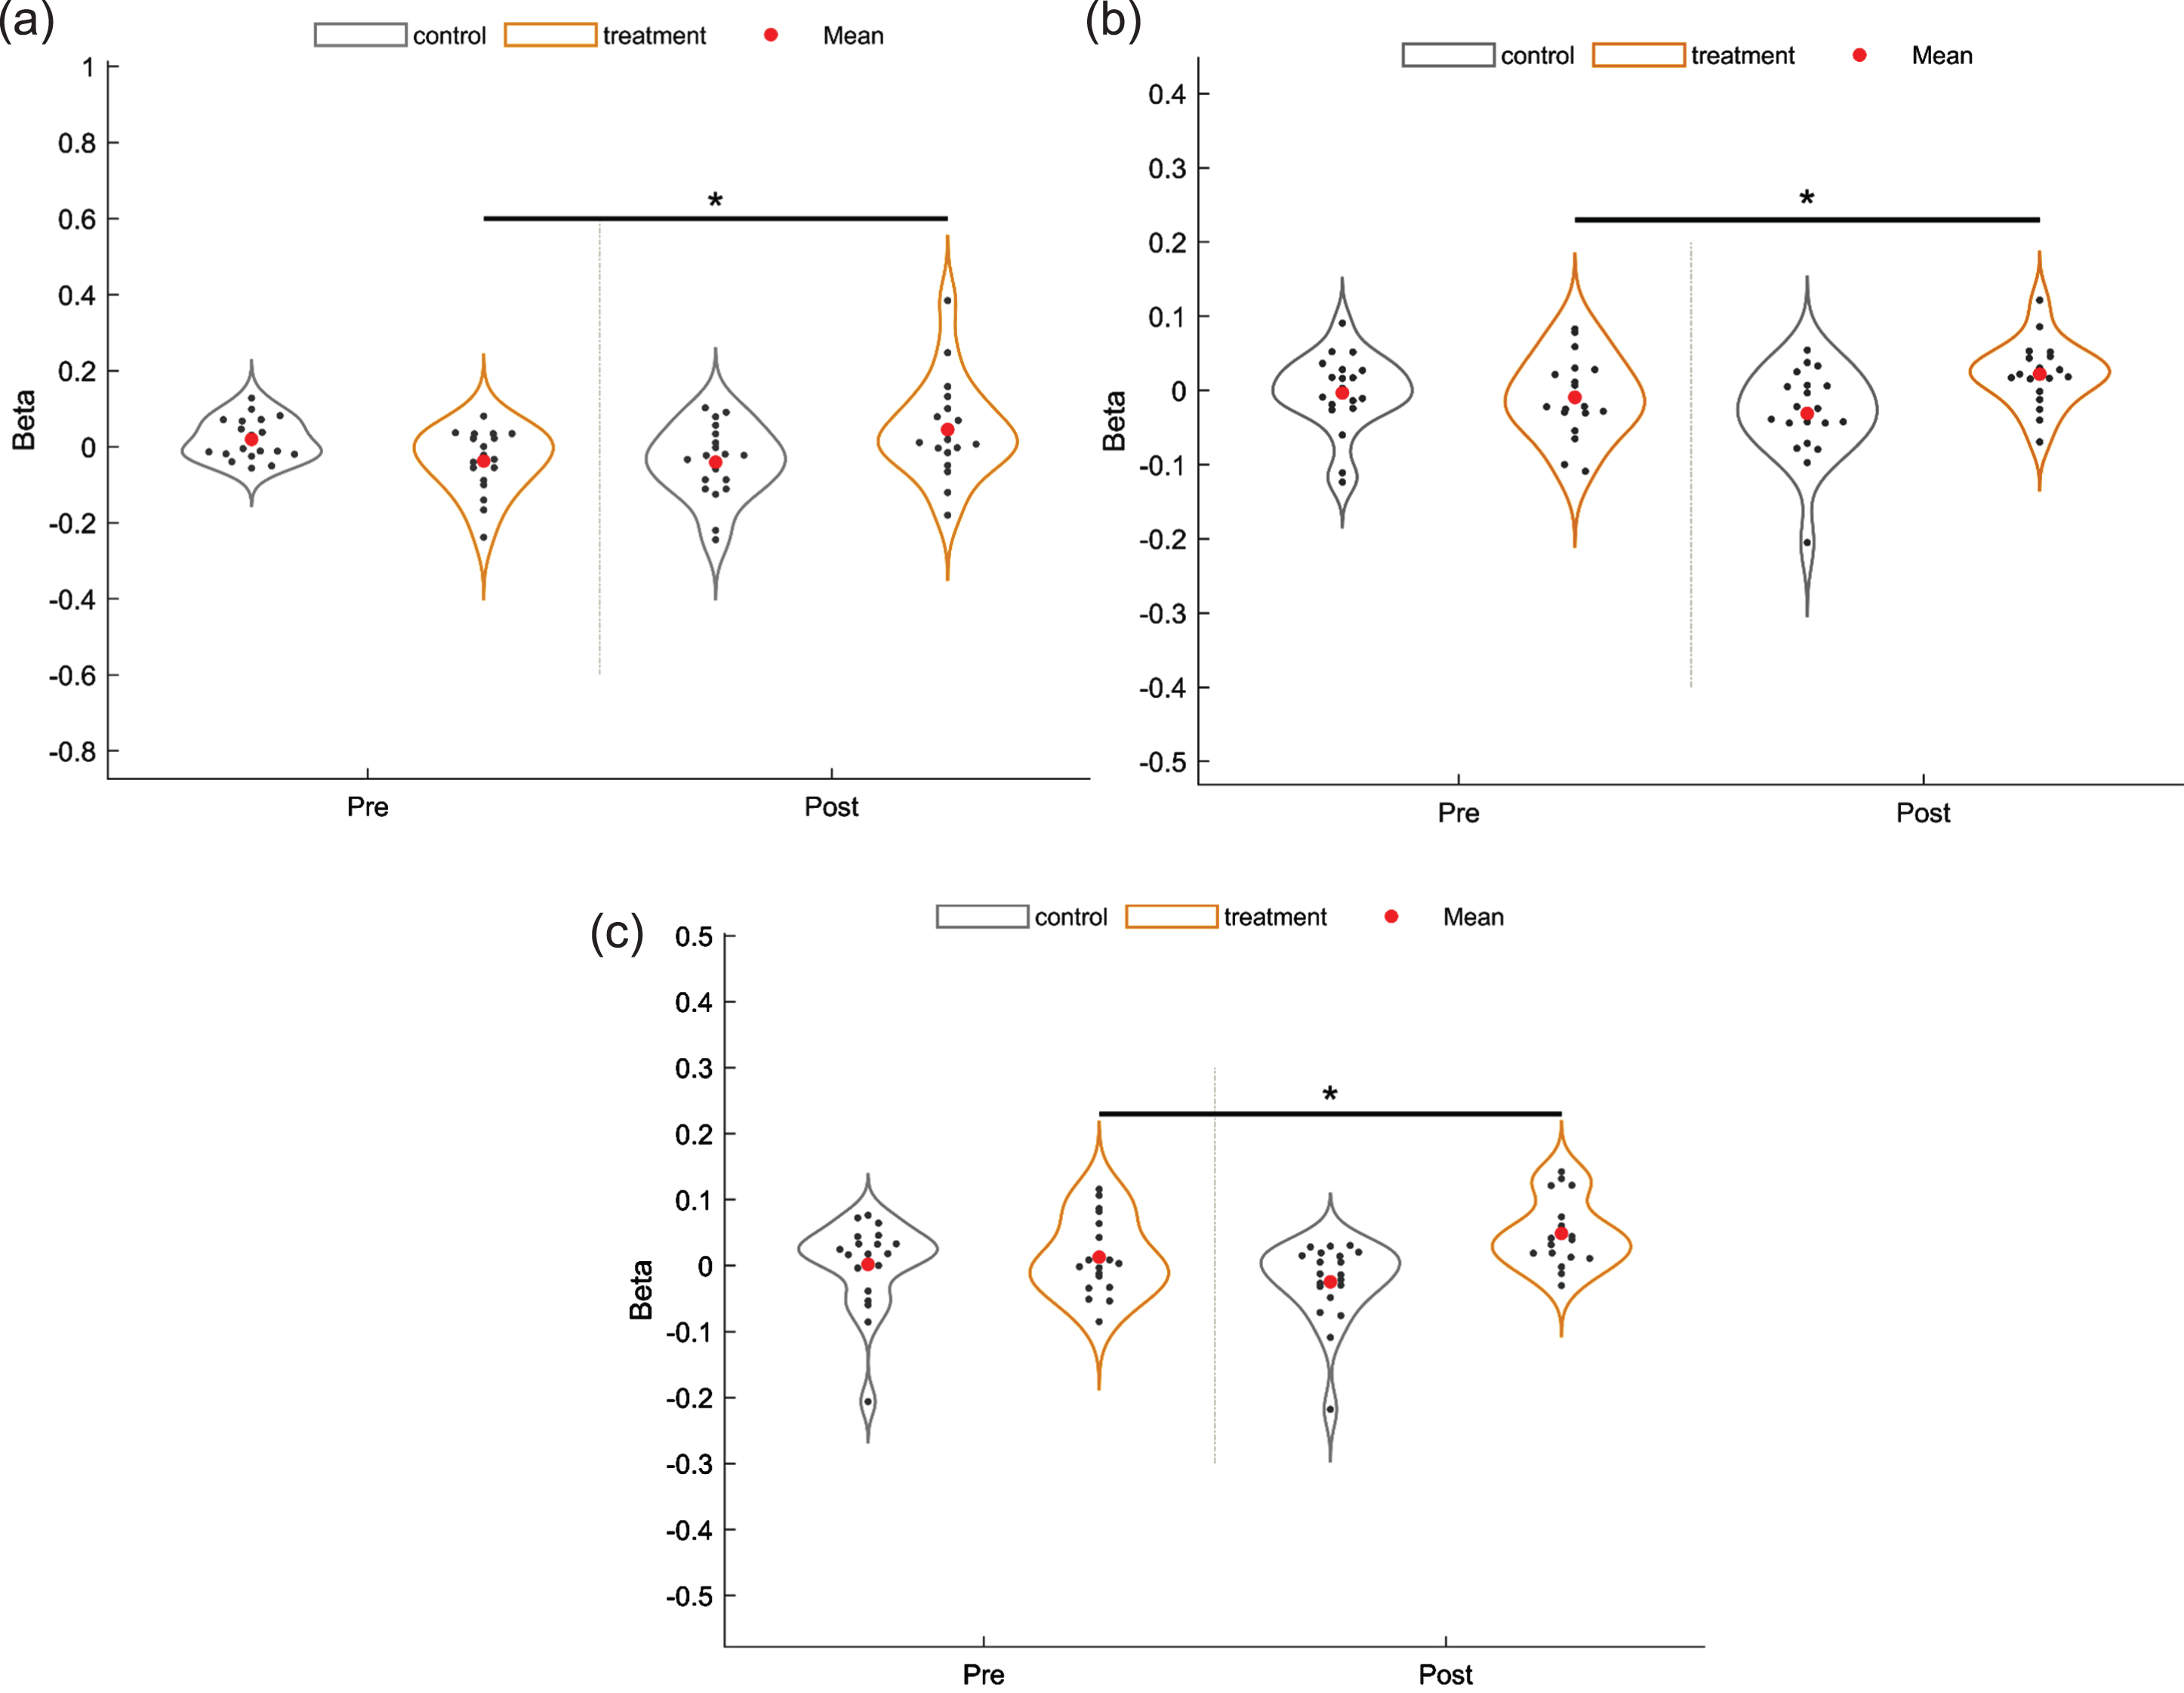 Violin plots of the interaction effects (*p < 0.05). (a) channel 32. (b) channel 37. (c) channel 38.